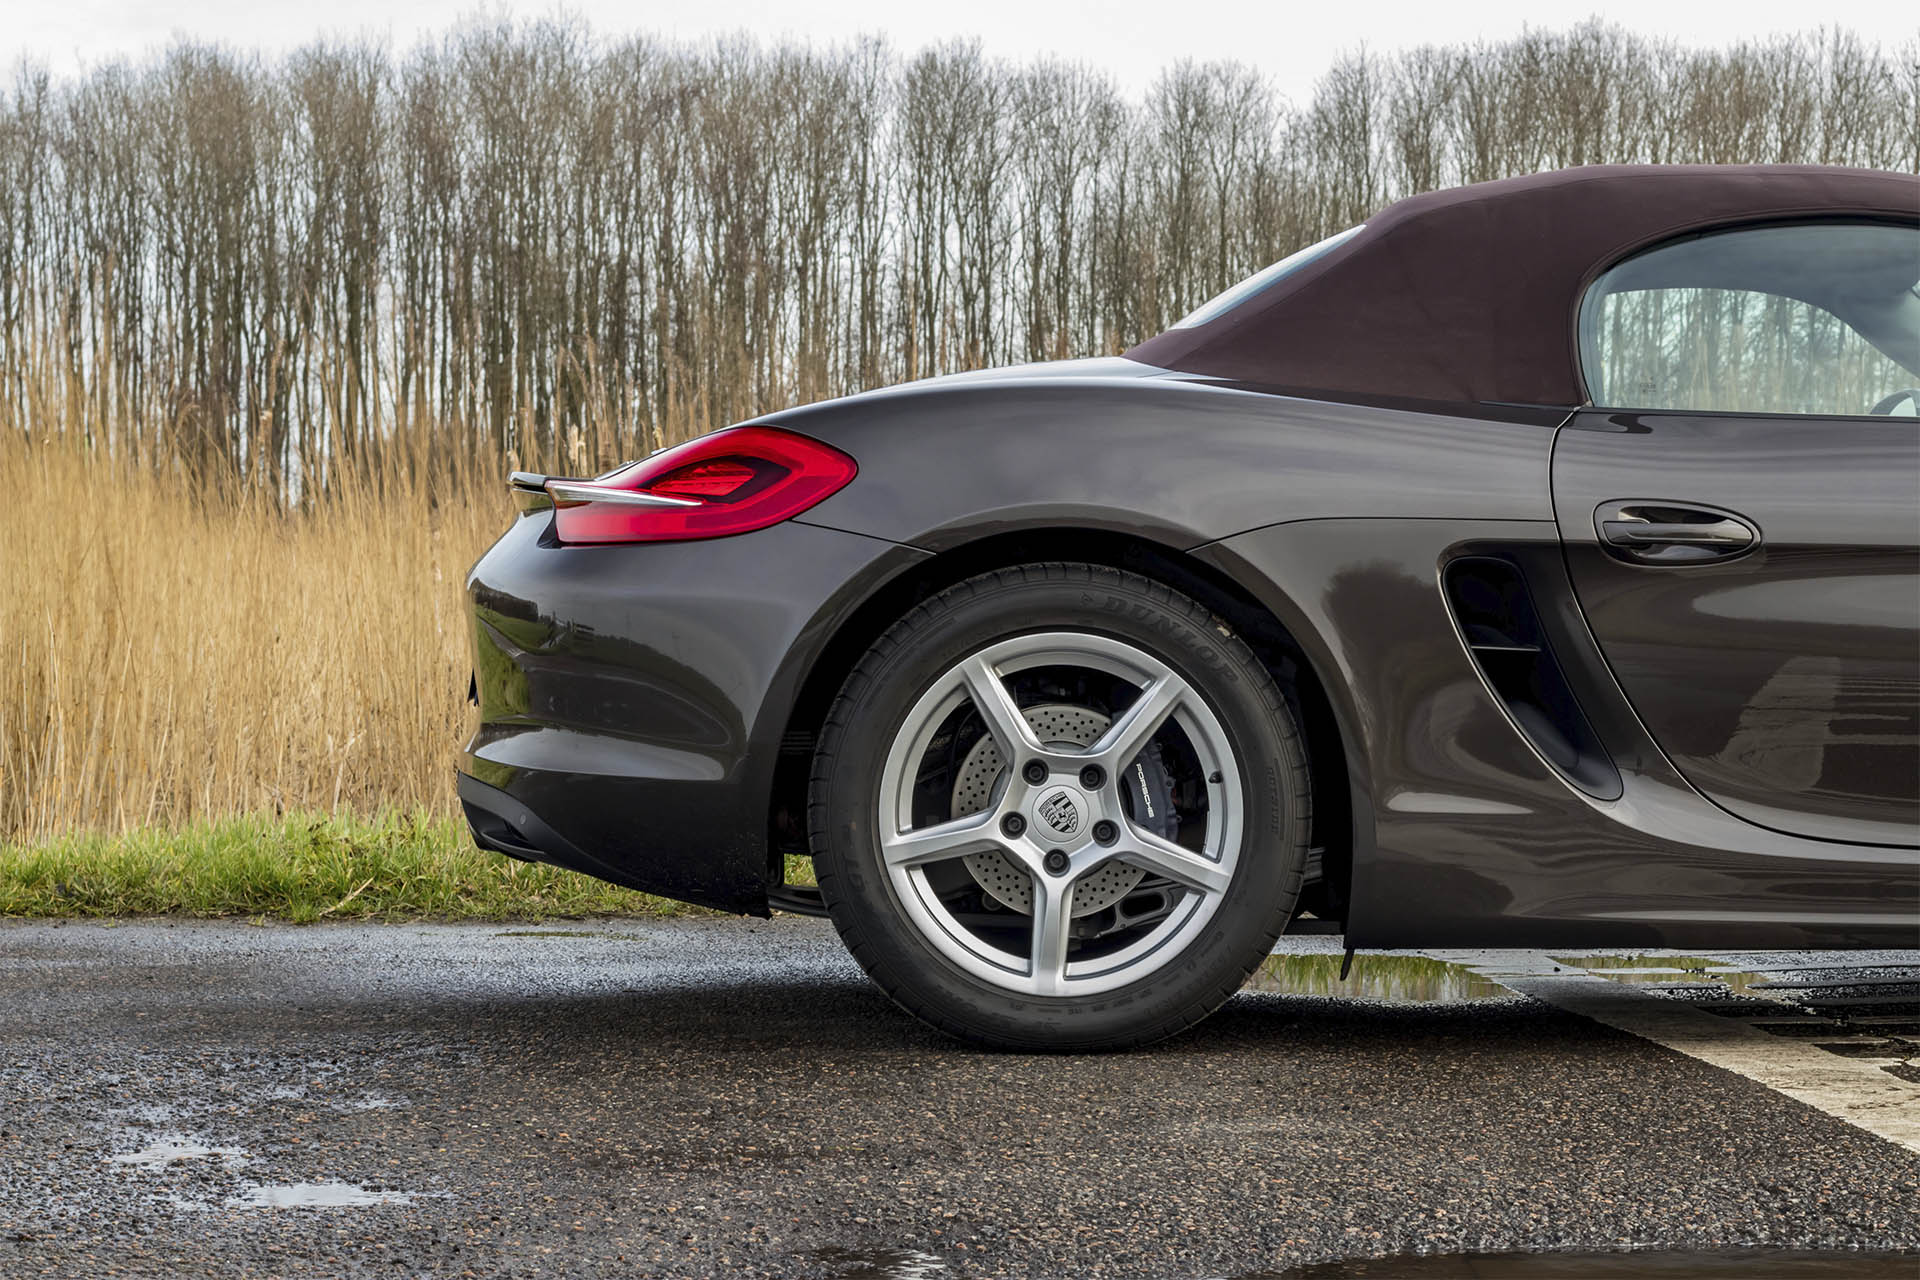 Real Art On Wheels | The Collection - Porsche Boxster